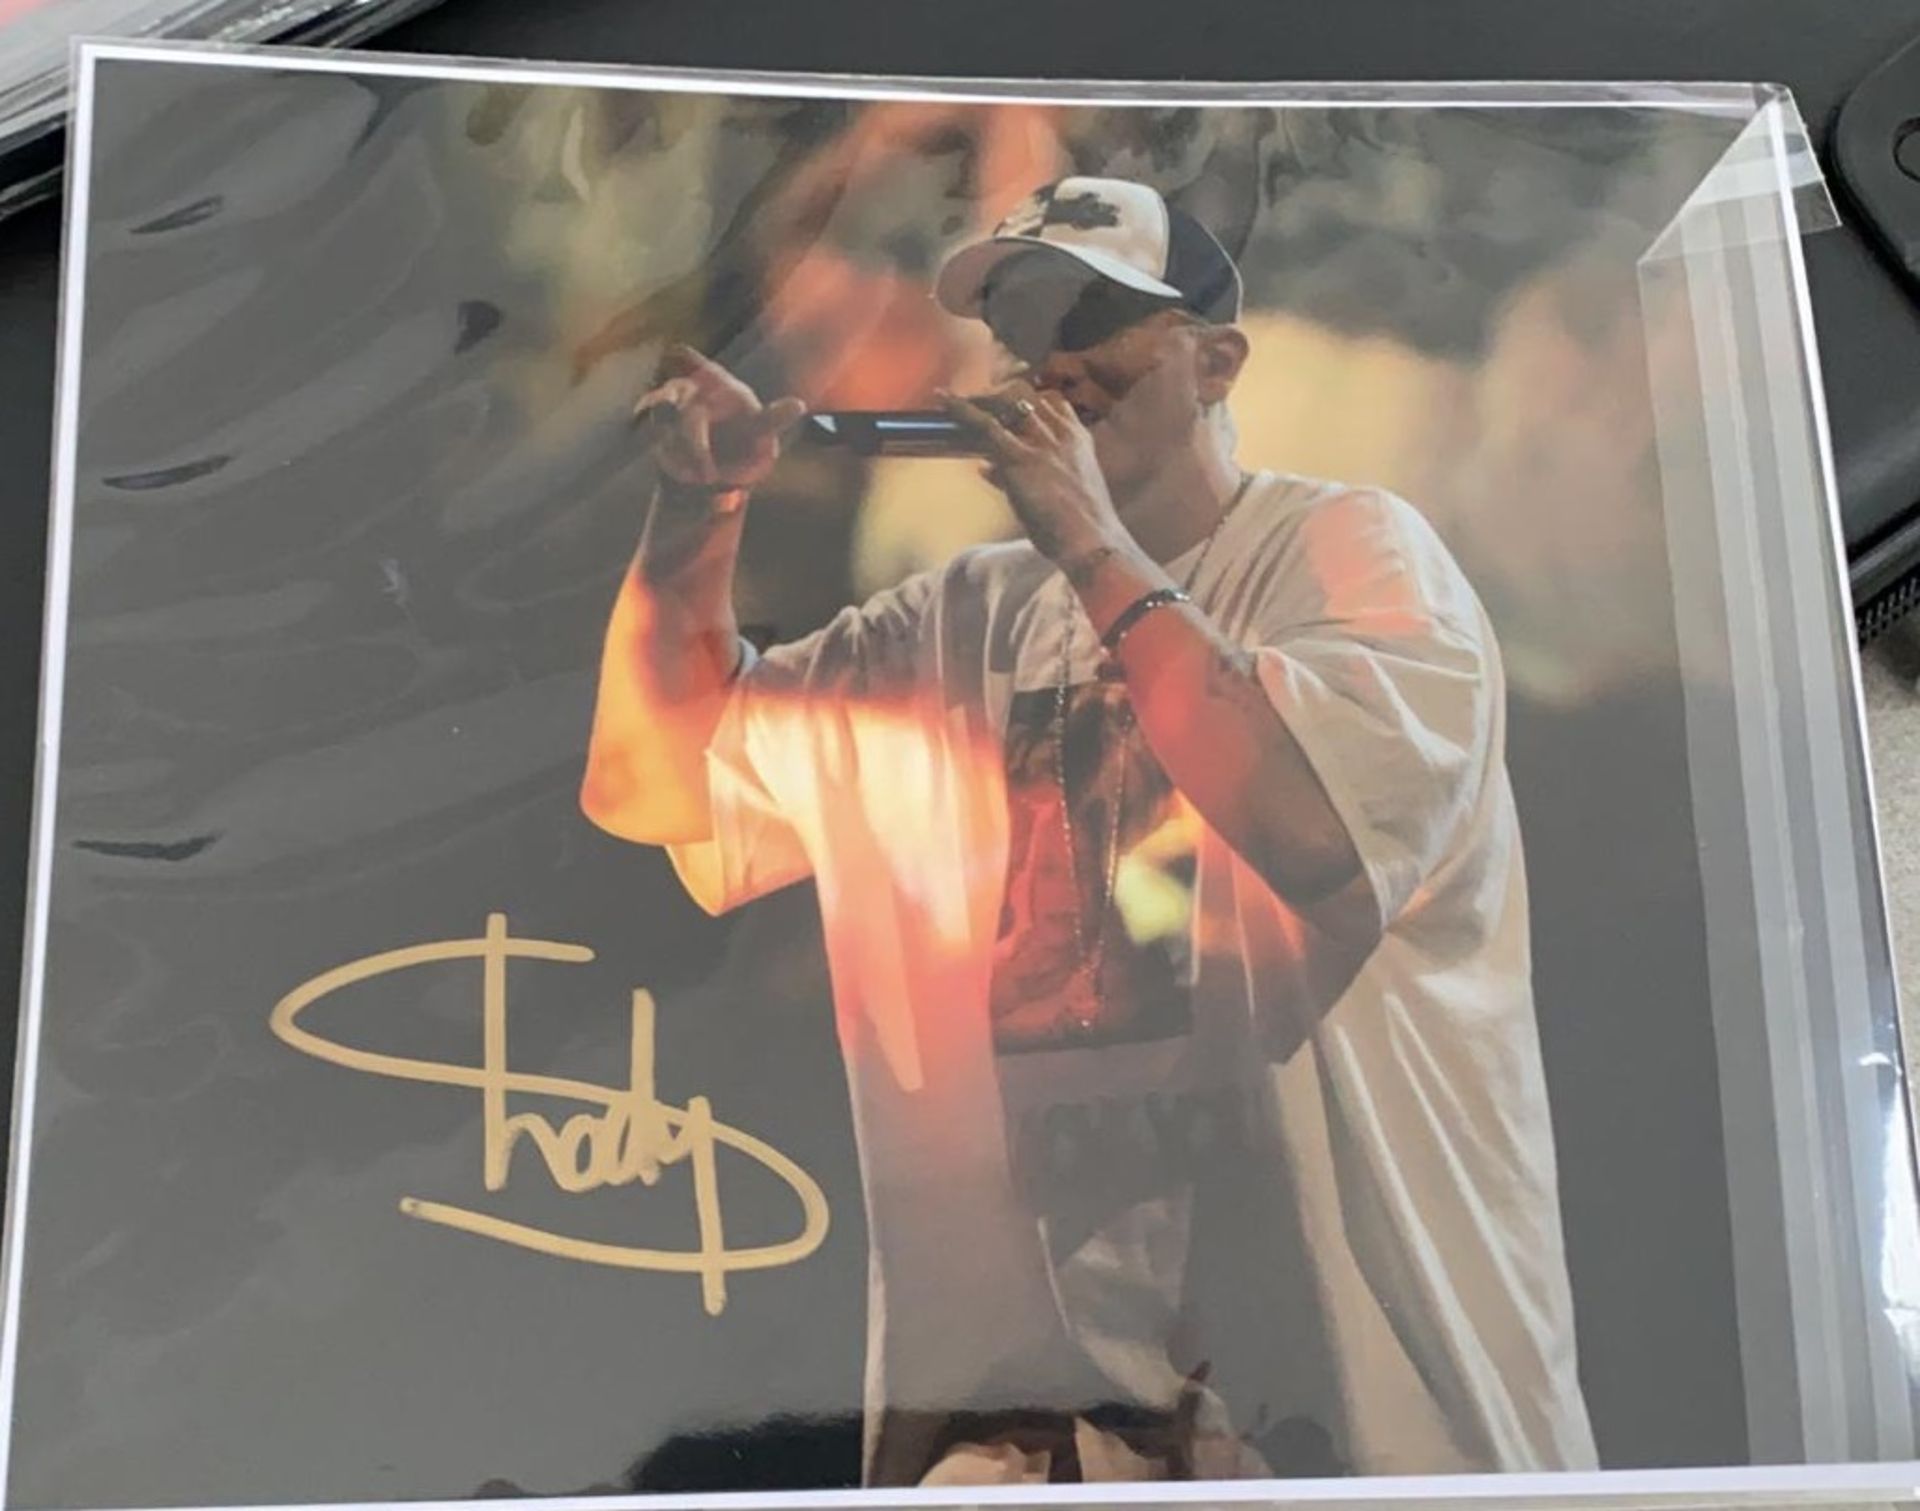 1 x Signed Autograph Picture - EMINEM - With COA - Size 10 x 8 Inch - NO VAT ON THE HAMMER PRICE -